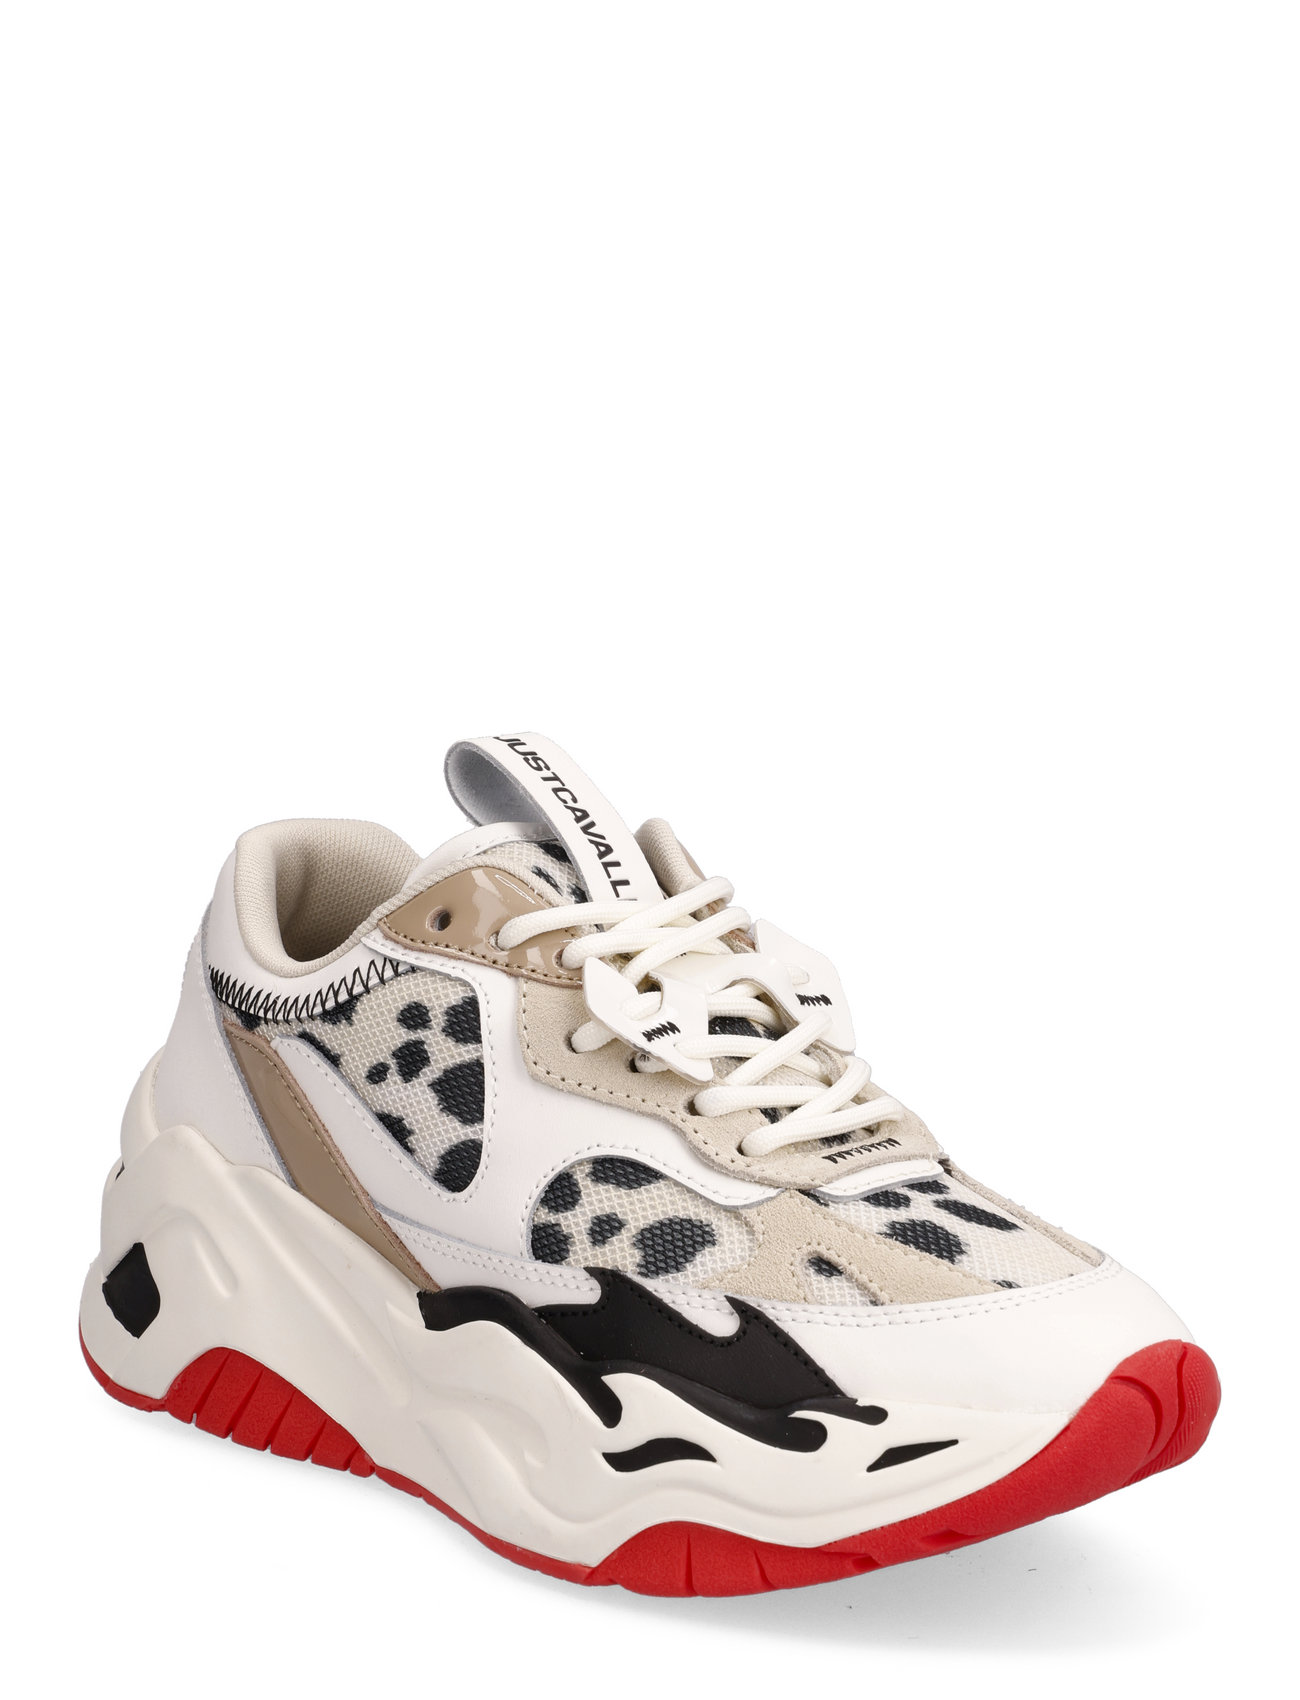 Just Cavalli Sneakers (Snow White), (165.75 | Large of outlet-styles | Booztlet.com